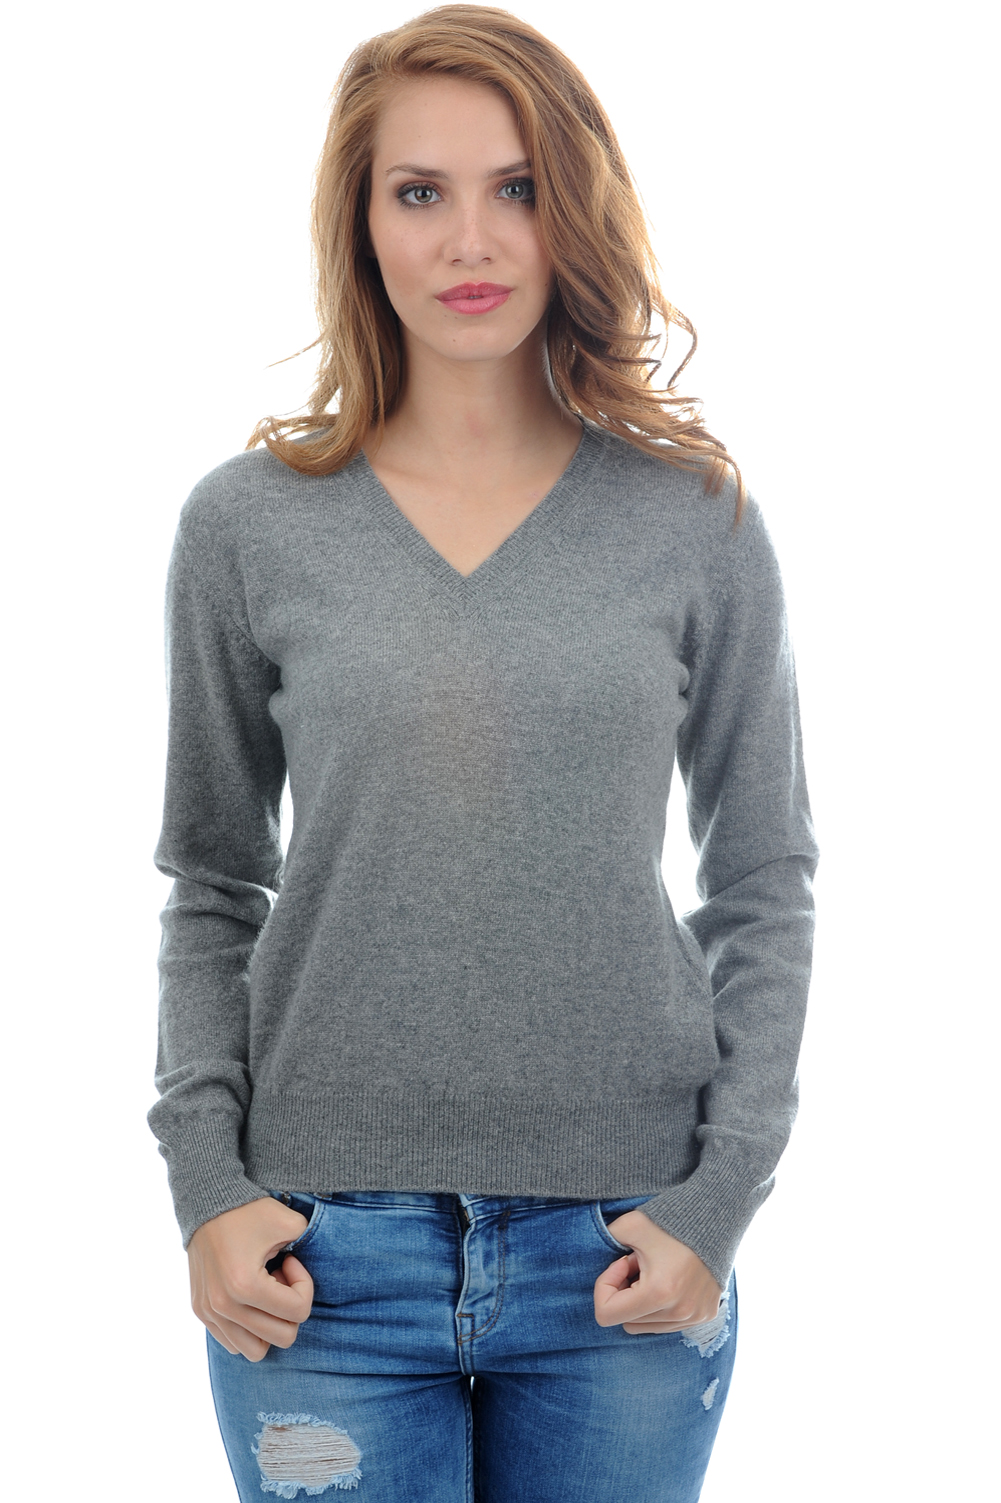 Cachemire pull femme faustine gris chine 4xl